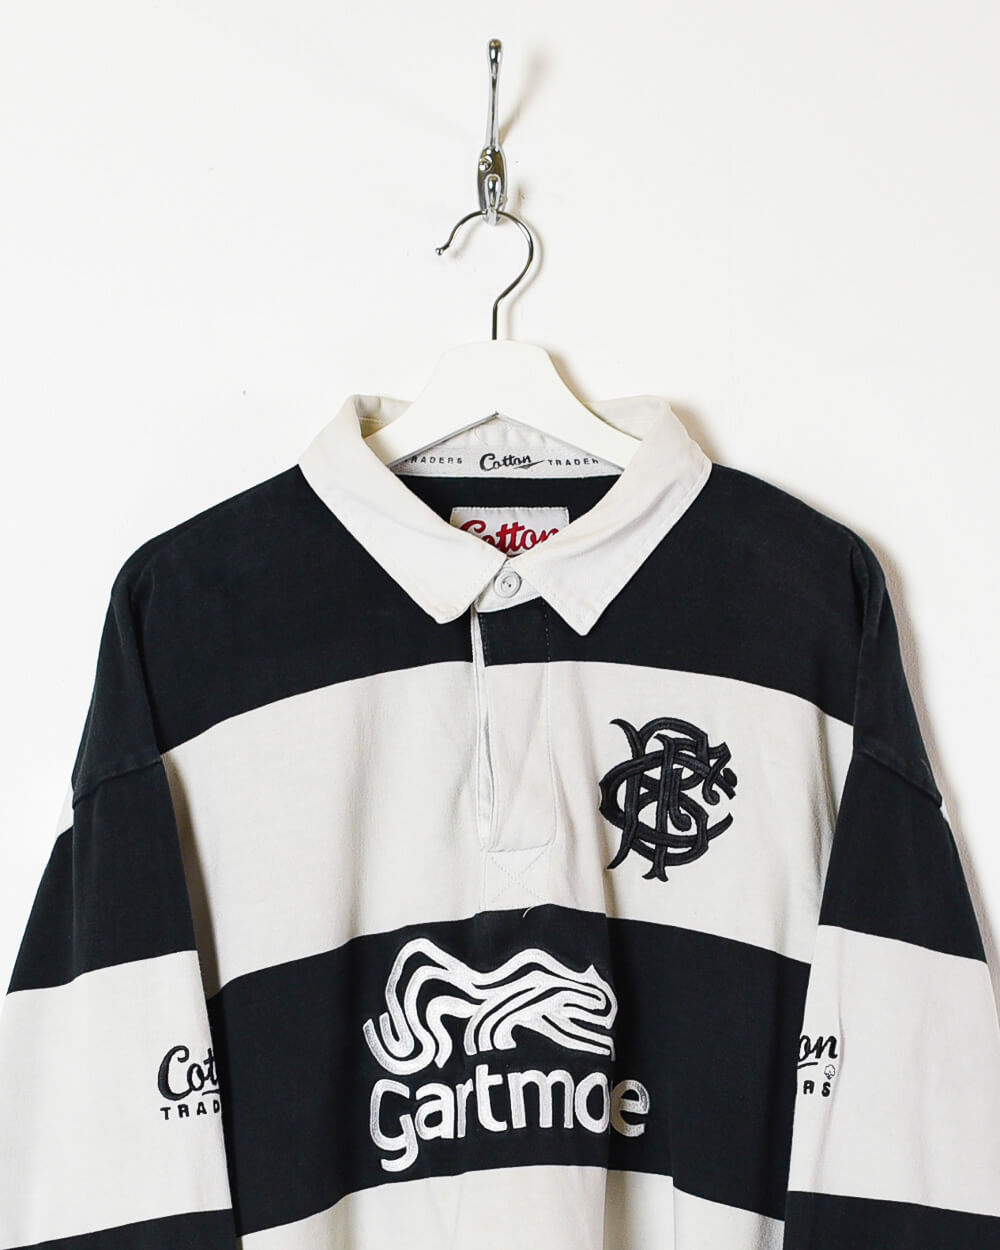 Black Cotton Traders Barbarians Rugby Shirt - XX-Large